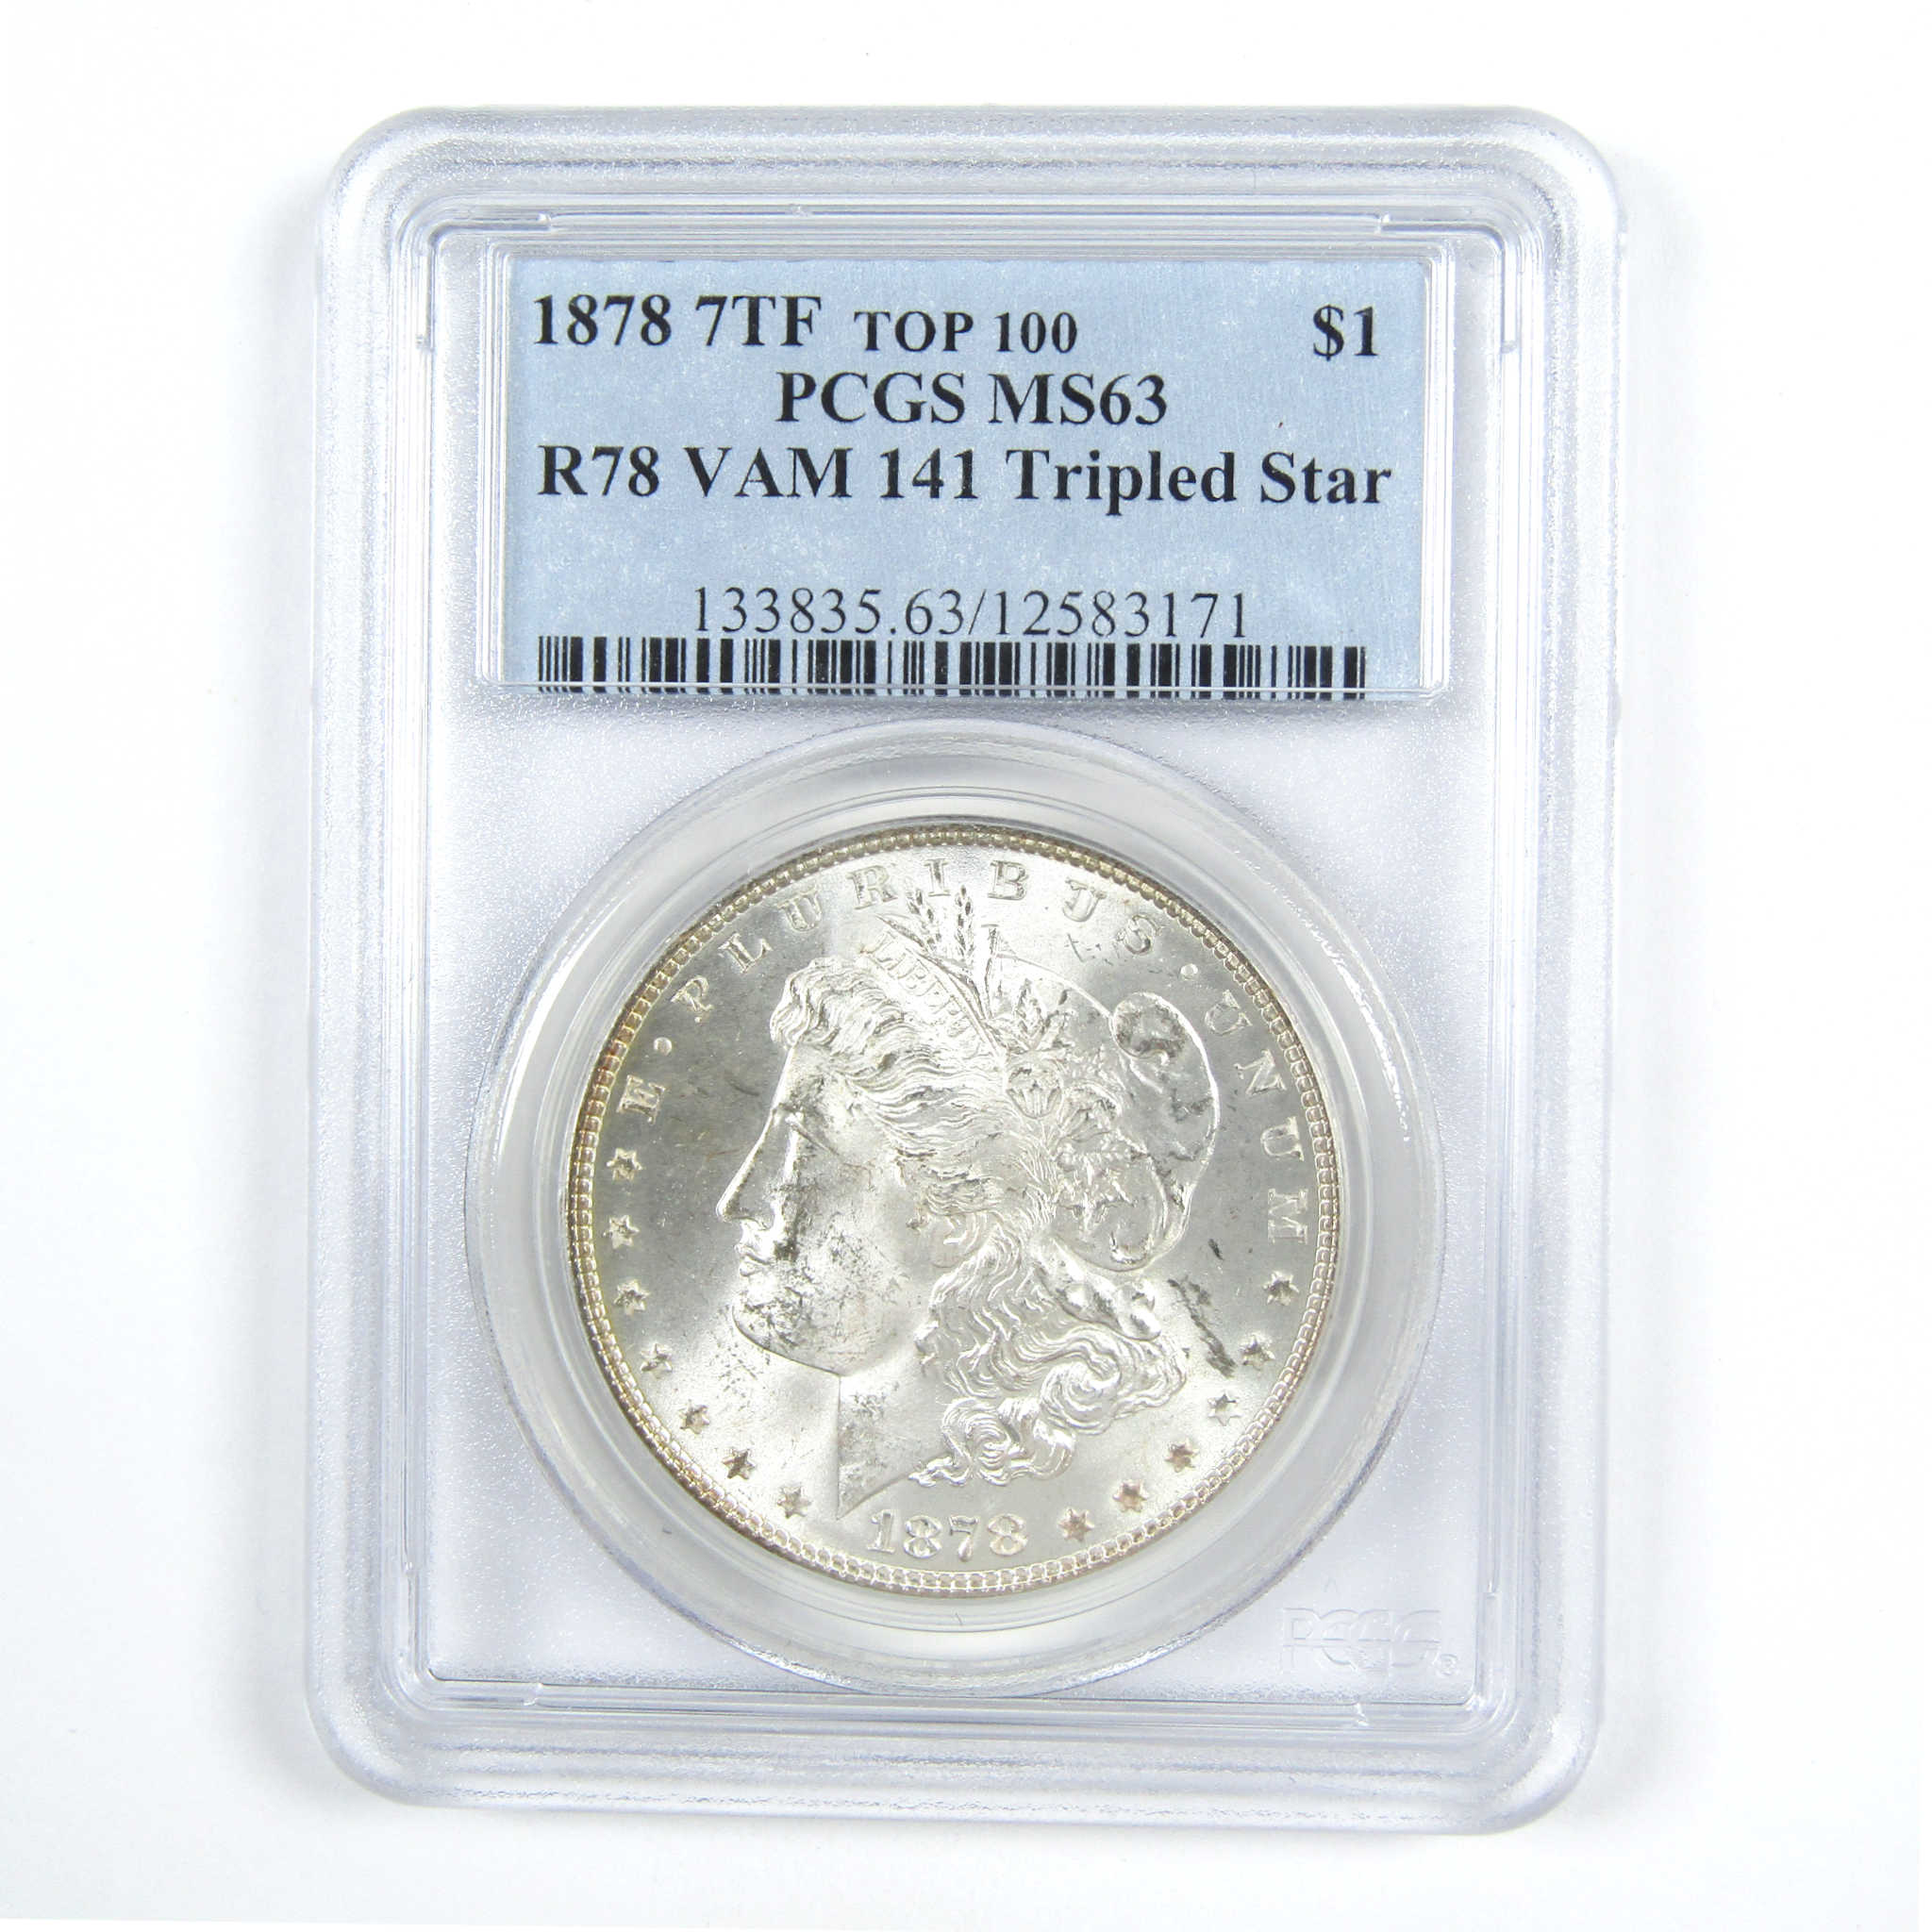 1878 7TF Rev 78 VAM-141 Morgan Dollar MS 63 PCGS Silver $1 SKU:CPC7329 - Morgan coin - Morgan silver dollar - Morgan silver dollar for sale - Profile Coins &amp; Collectibles